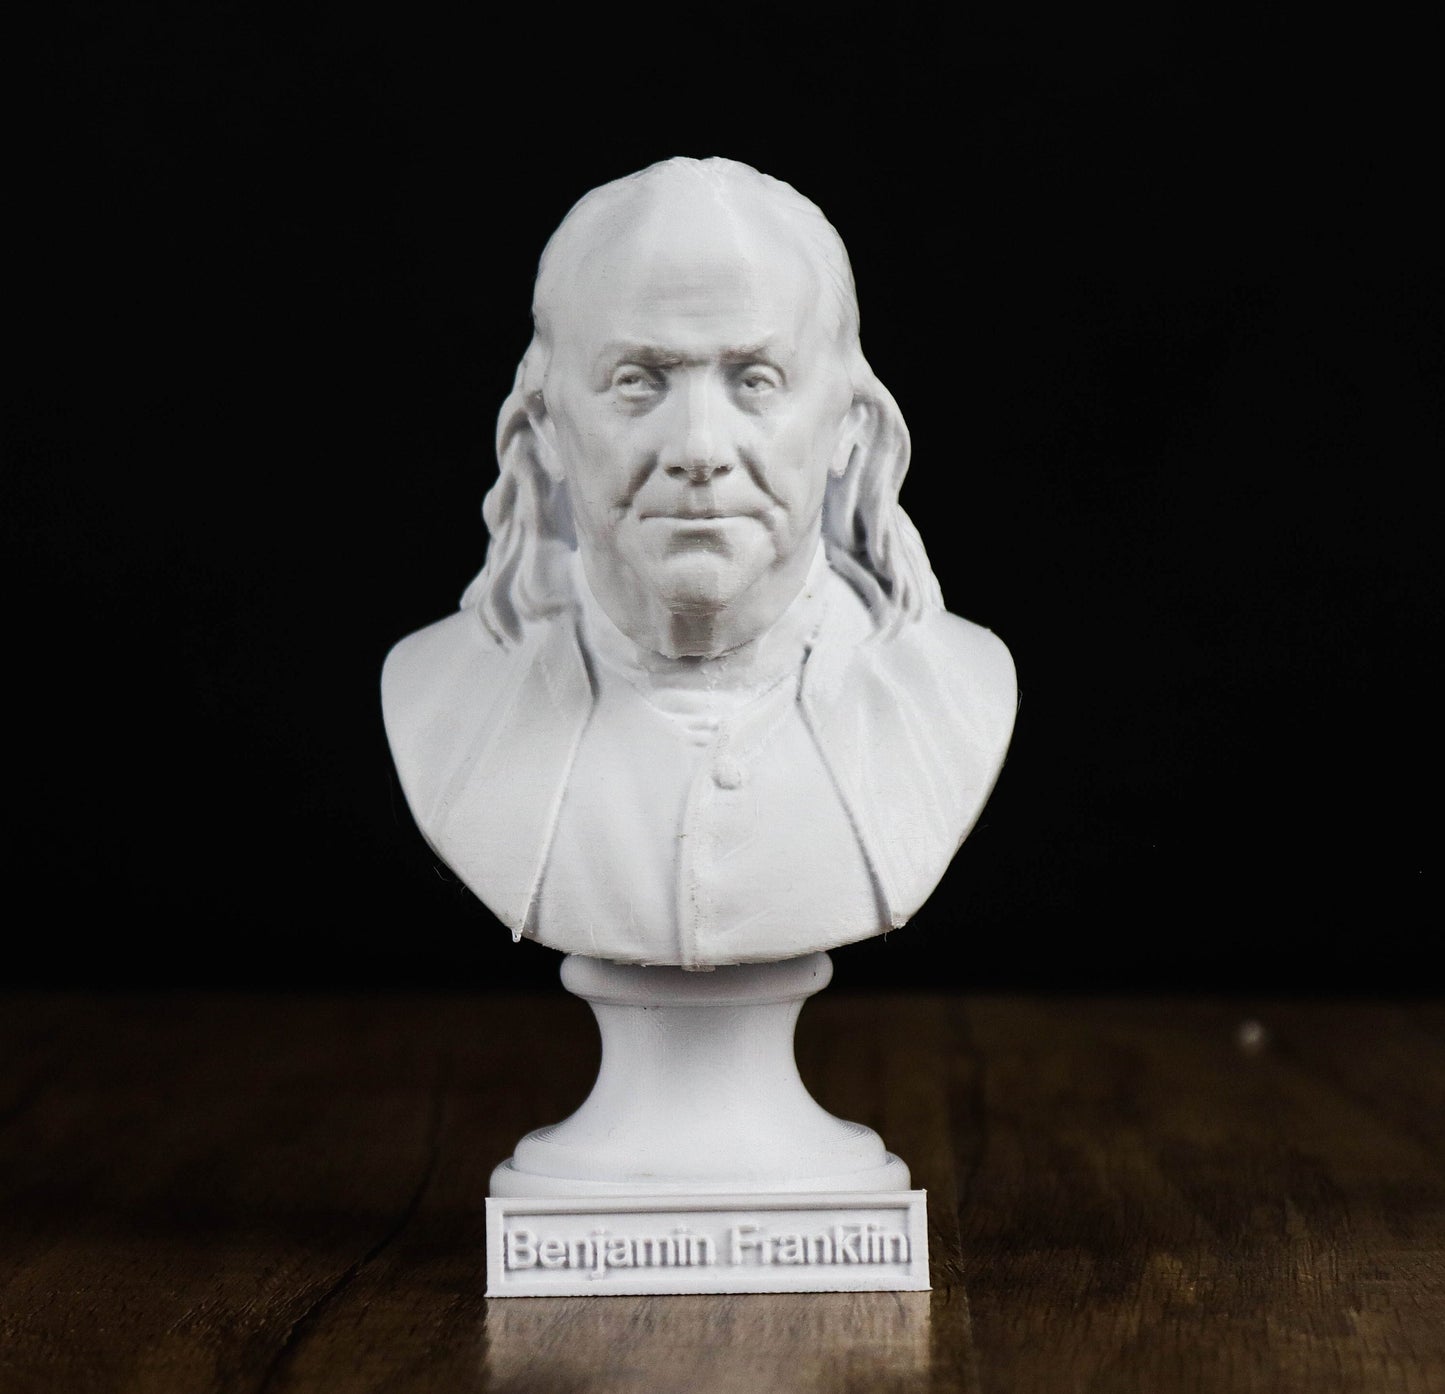 Benjamin Franklin Bust, Founding Father of the United States Statue